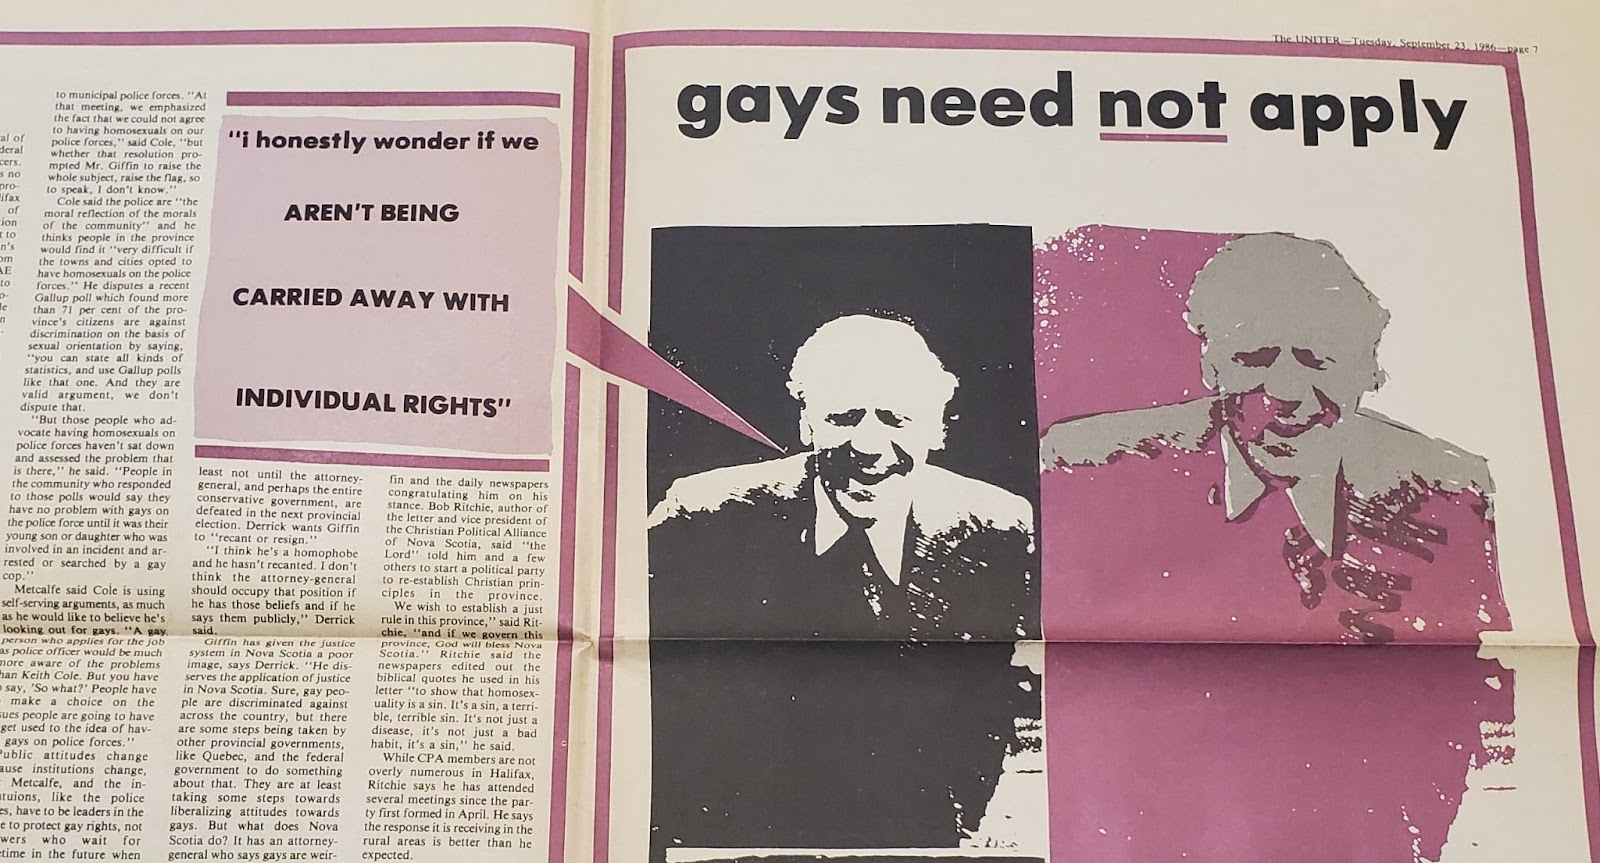 Newspaper article featuring a large altered photograph of former Nova Scotia Attorney General Ron Giffin who is quoted saying, “I honestly wonder if we aren’t being carried away with individual rights” in response to a Parliamentary proposal that would result in gay and lesbian inclusion in police forces. The bolded text above the image reads “gays need not apply.”